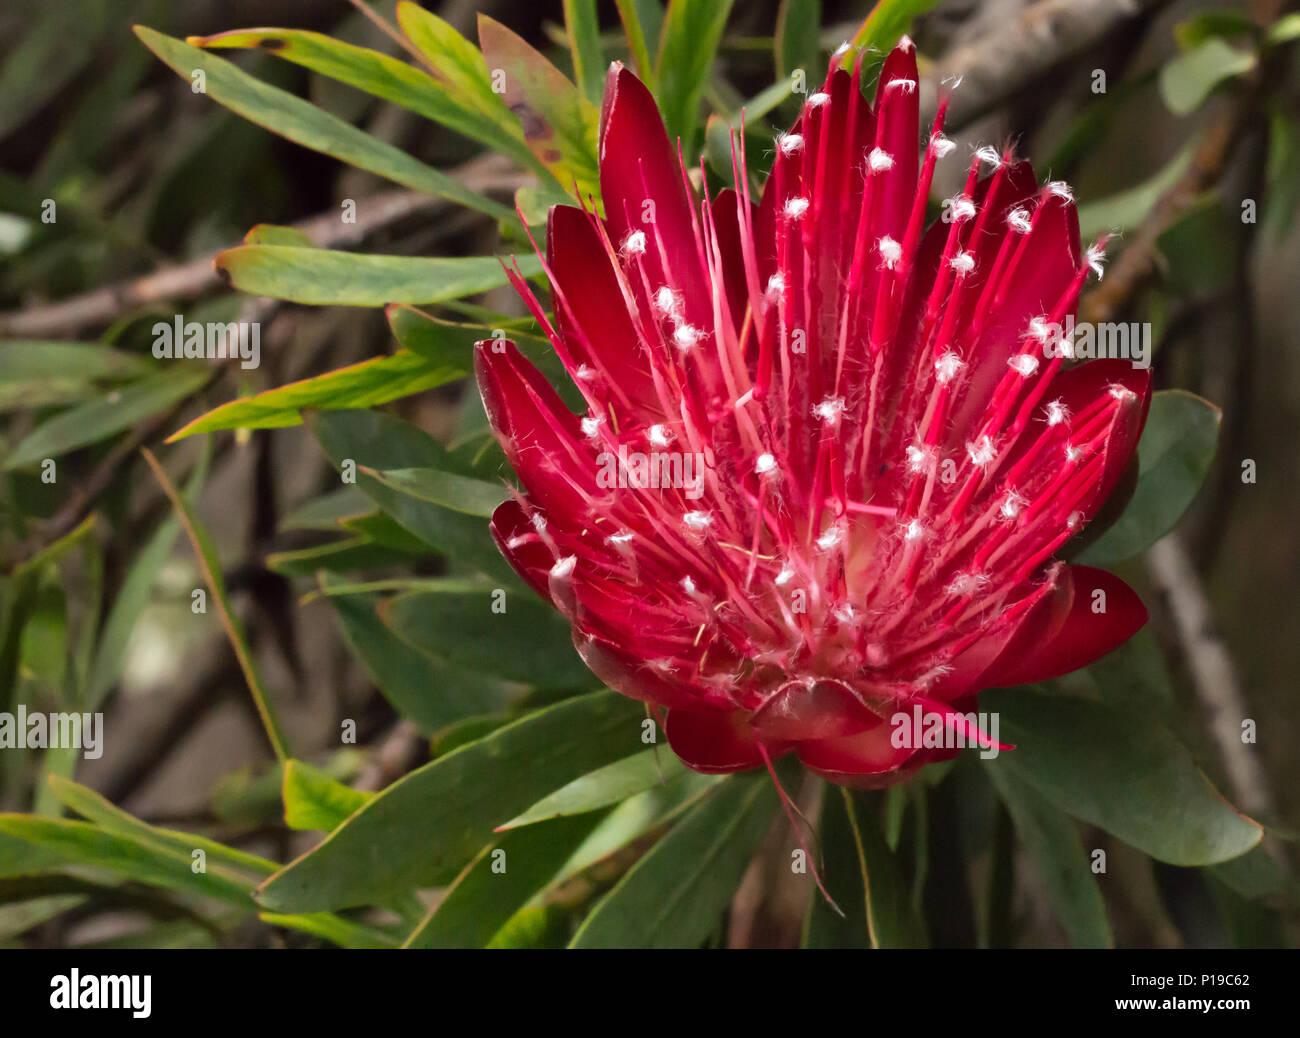 Red tropical flower blossom on Protea bush against green leaves Stock Photo